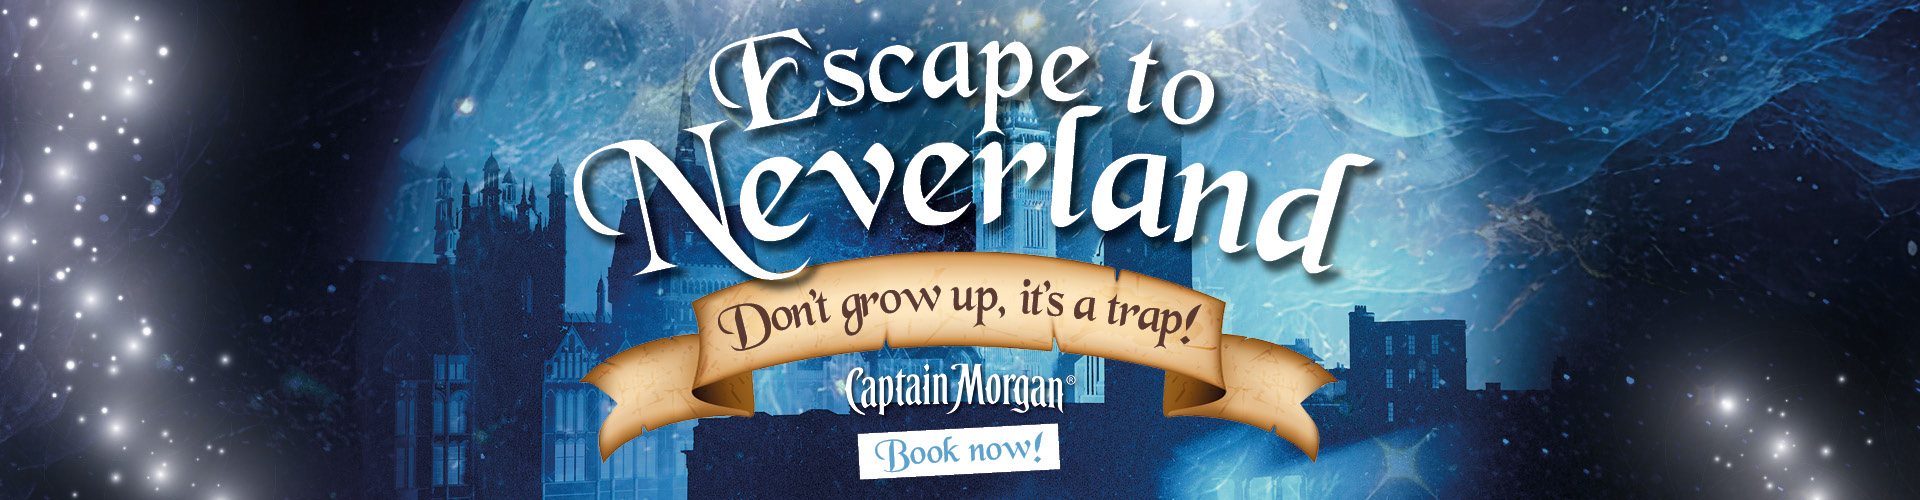 Escape to Neverland this NYE at Popworld Liverpool